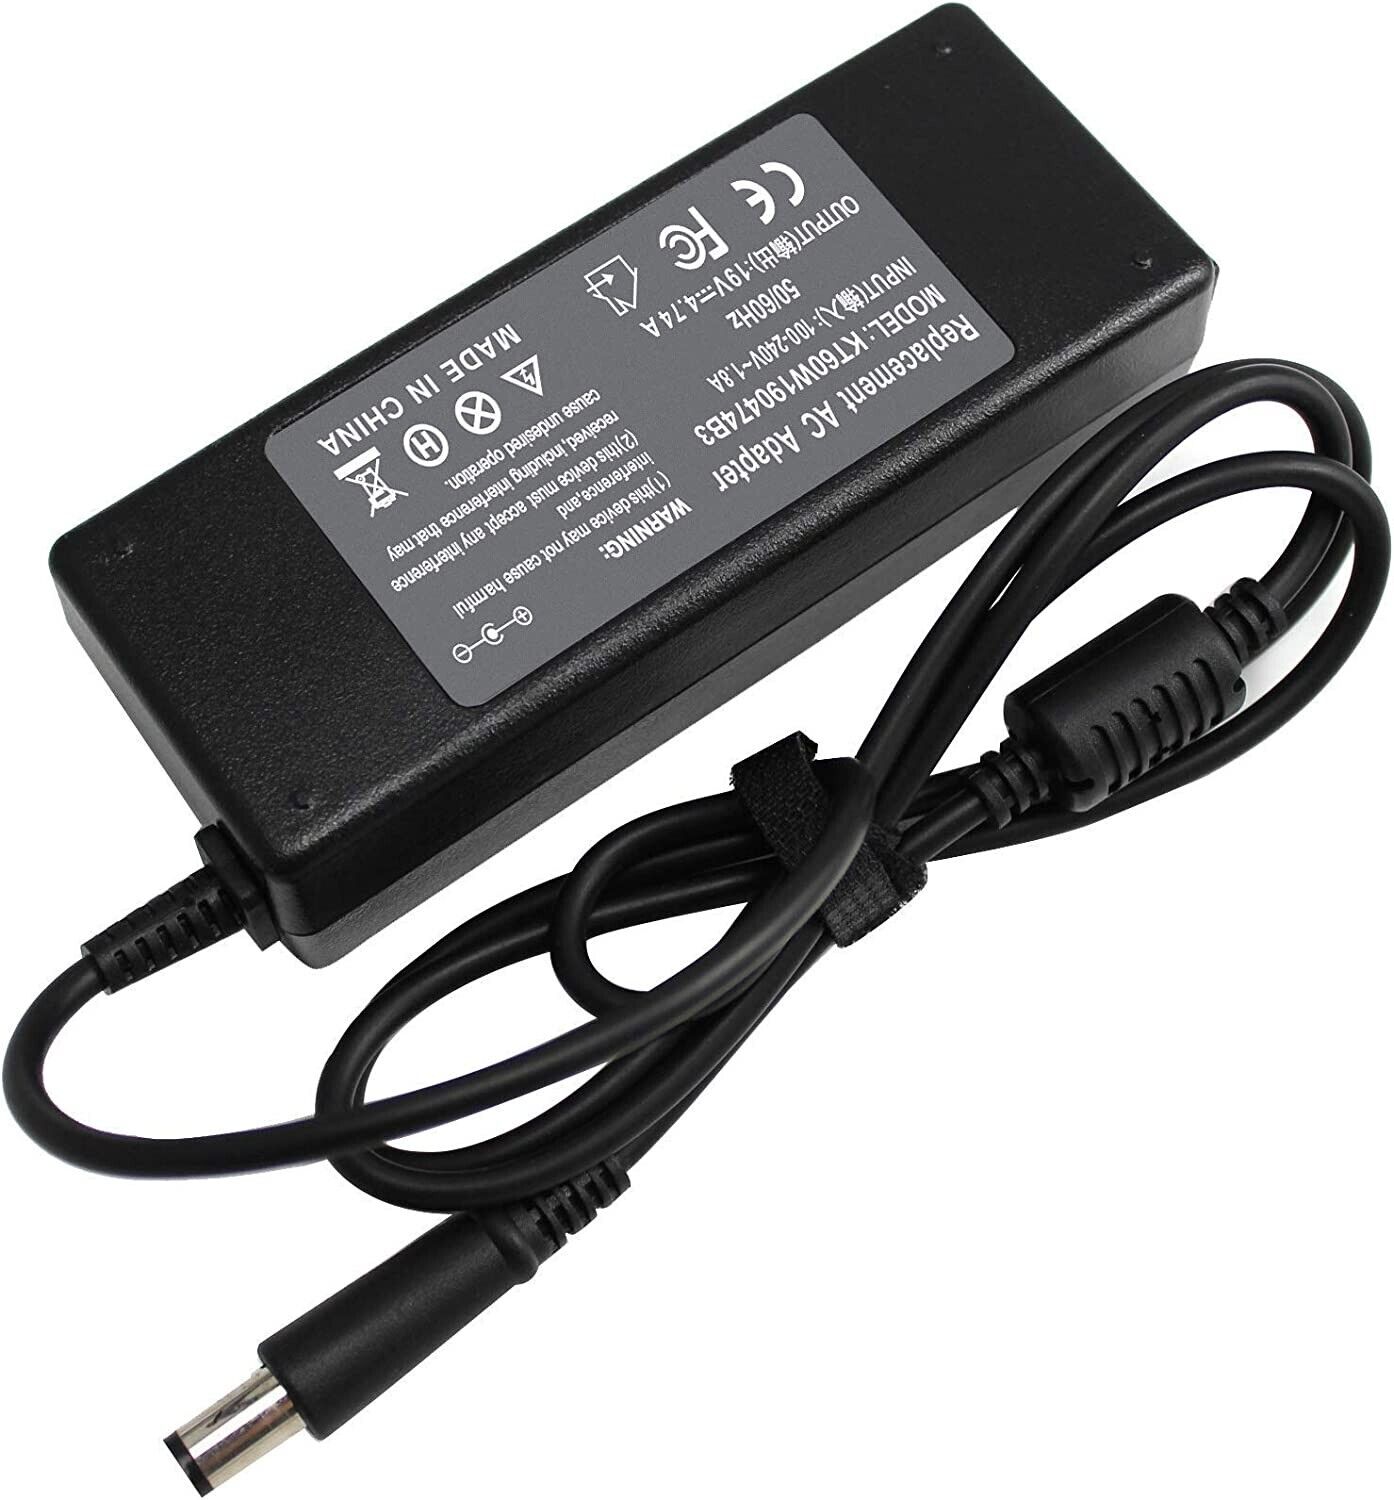 AC Adapter Charger For HP Envy 23xt Beats Special Ed All-in-One PC 23-n110xt